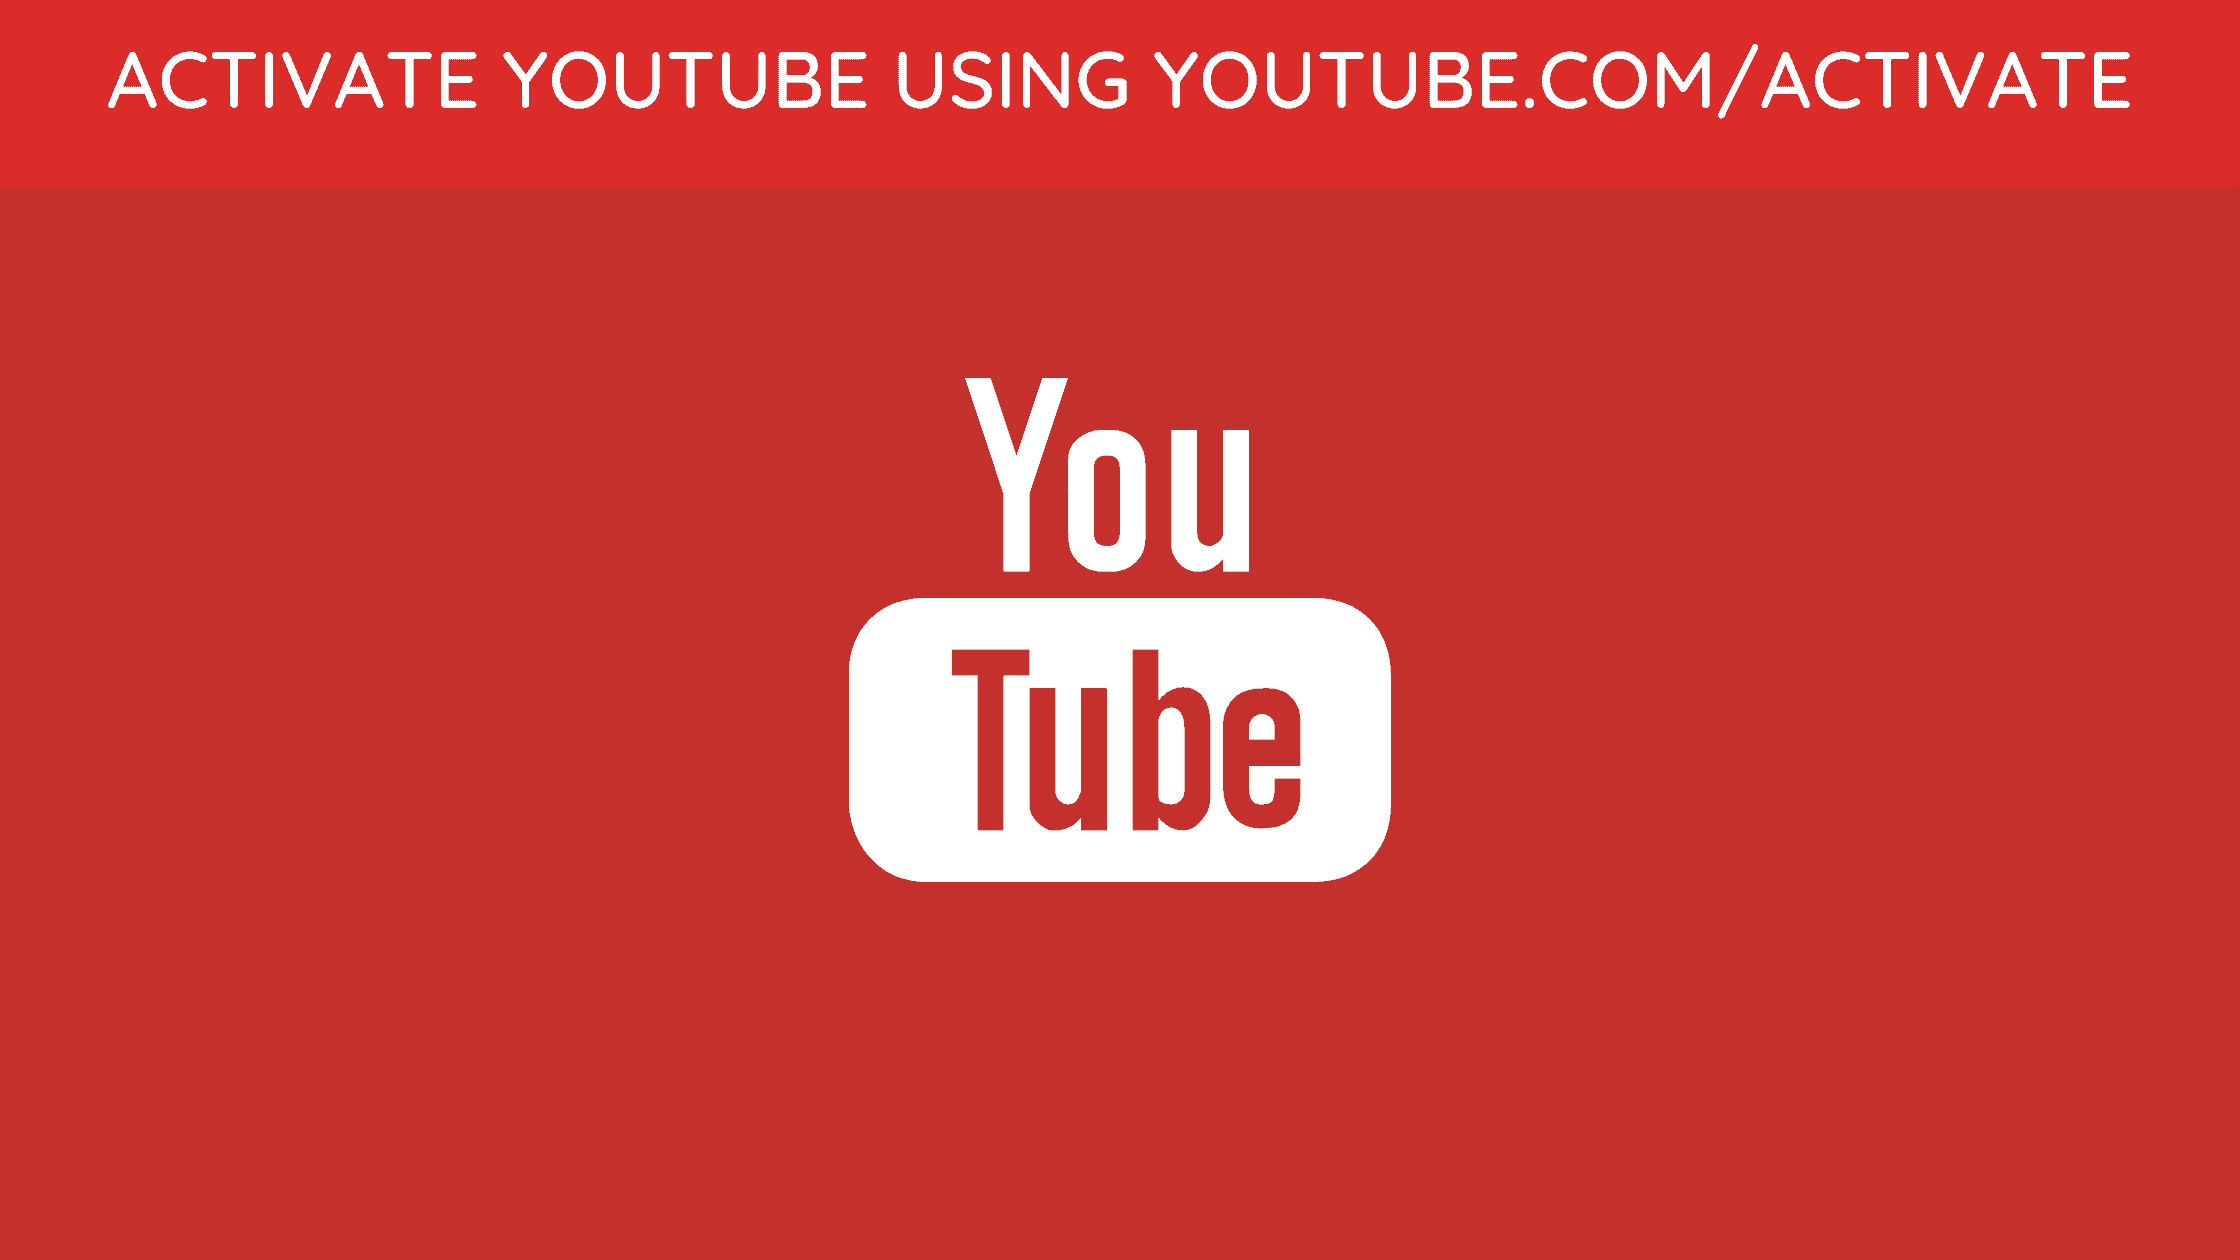 Activate-YouTube-Using-Youtube.com_activate